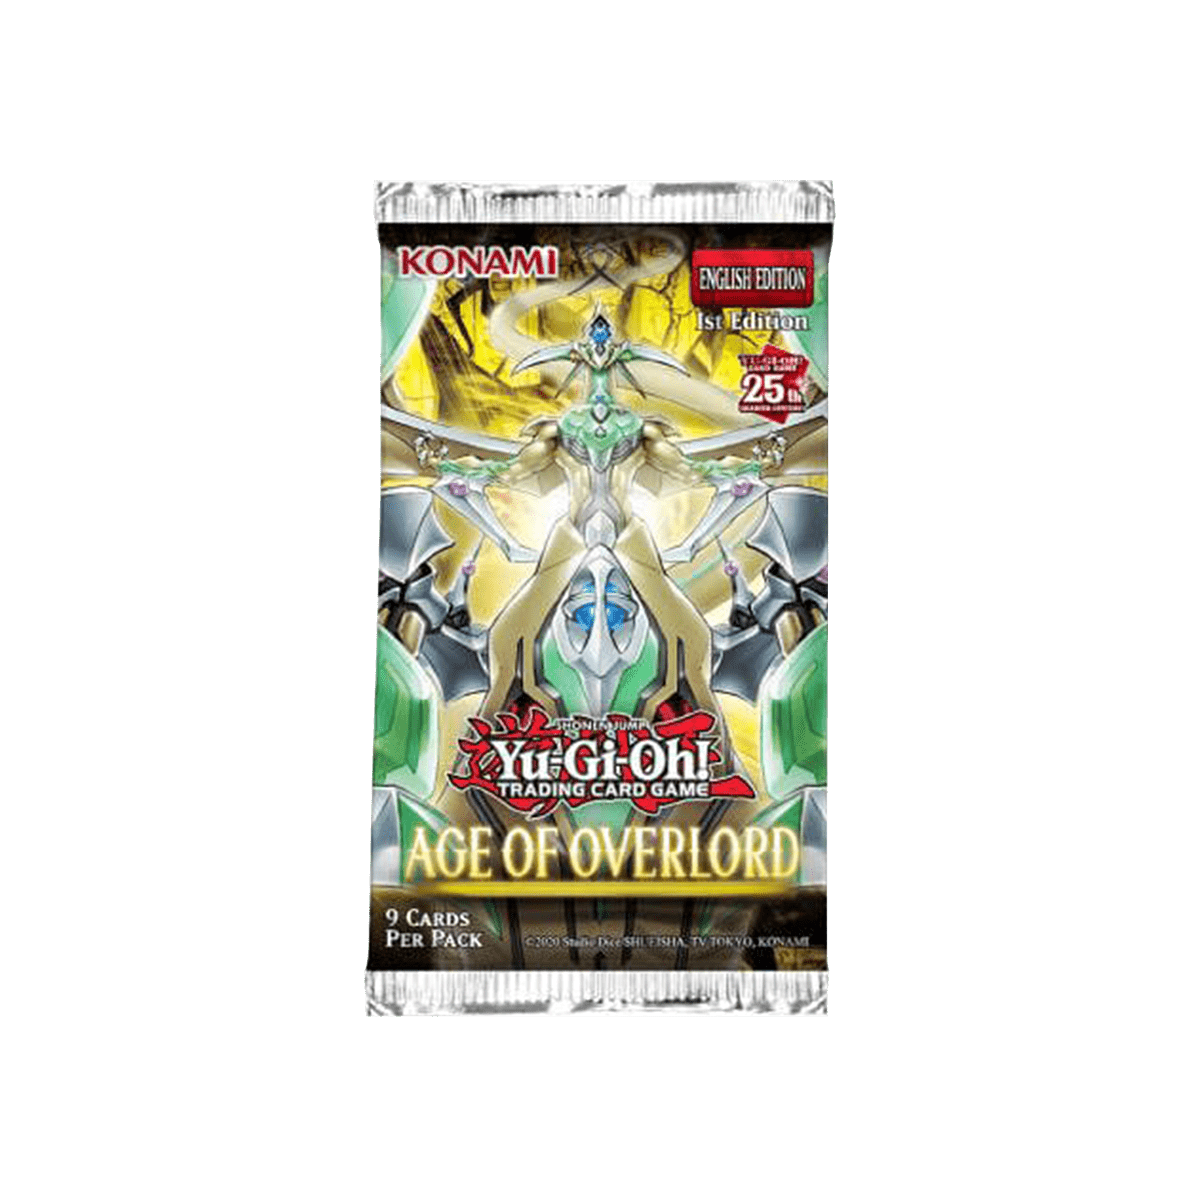 Yu-Gi-Oh! - Age of Overlord Booster Display - Cardmaniac.ch